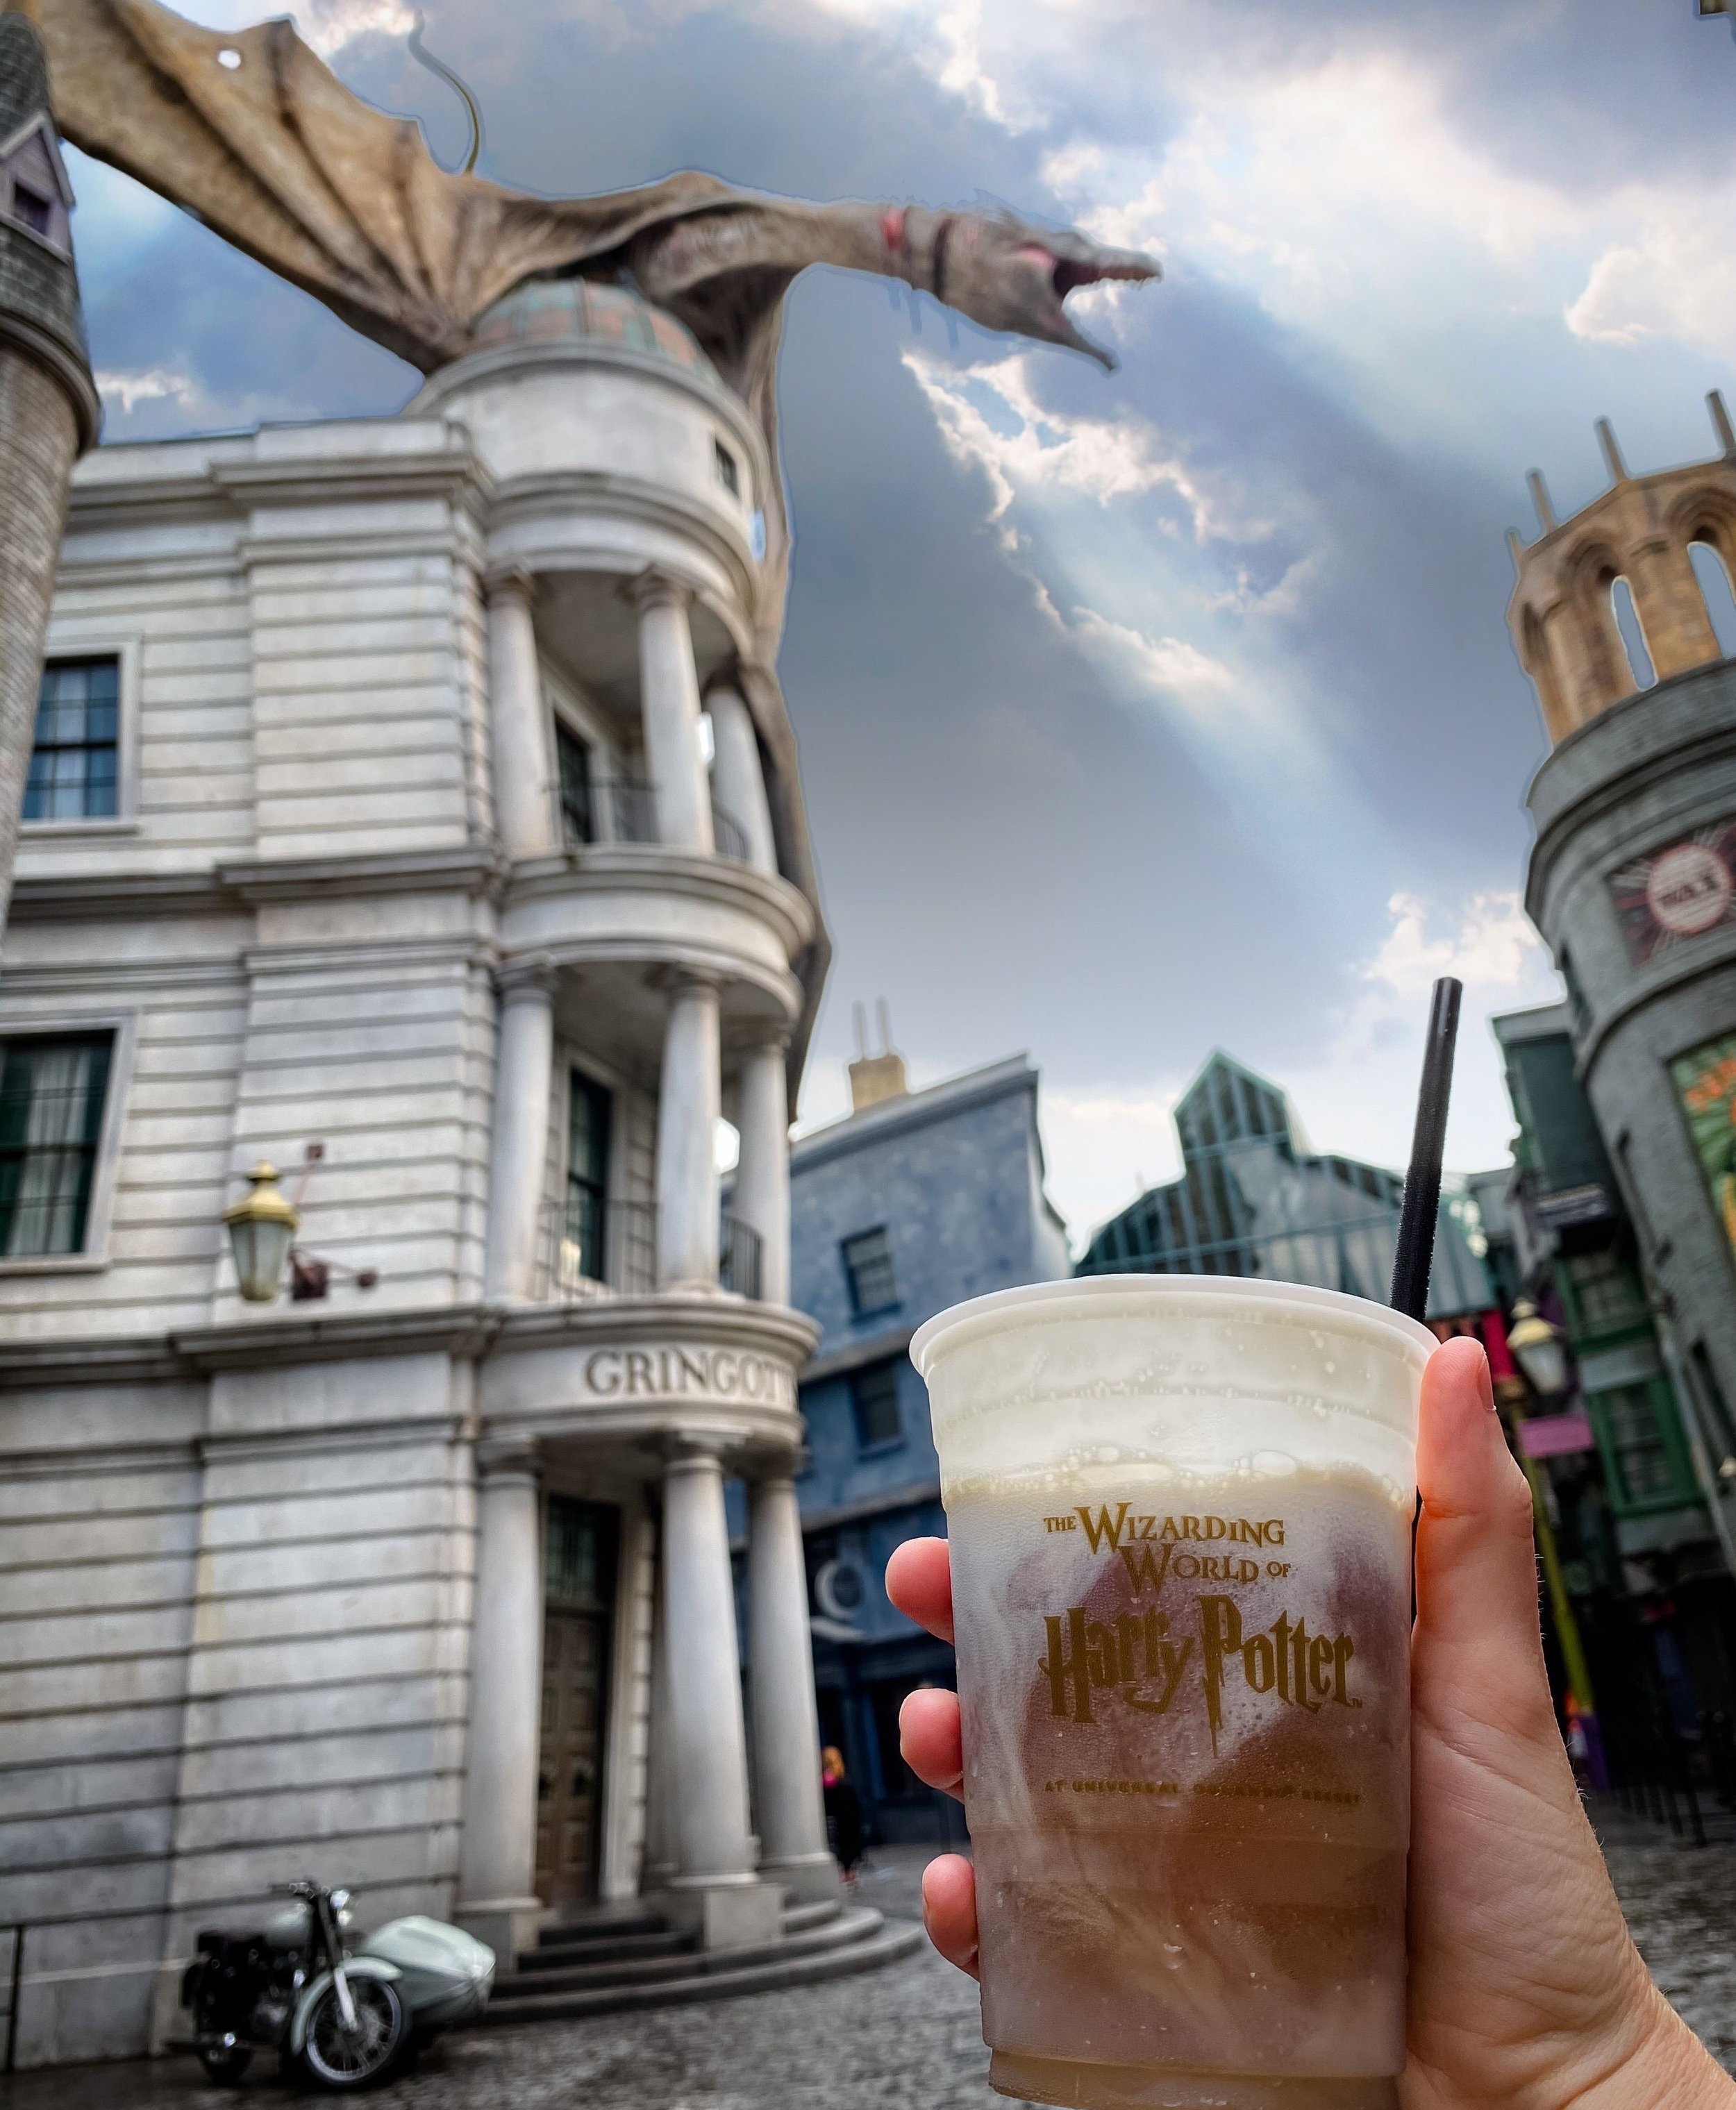 How To Save Time At Universal Studios Orlando